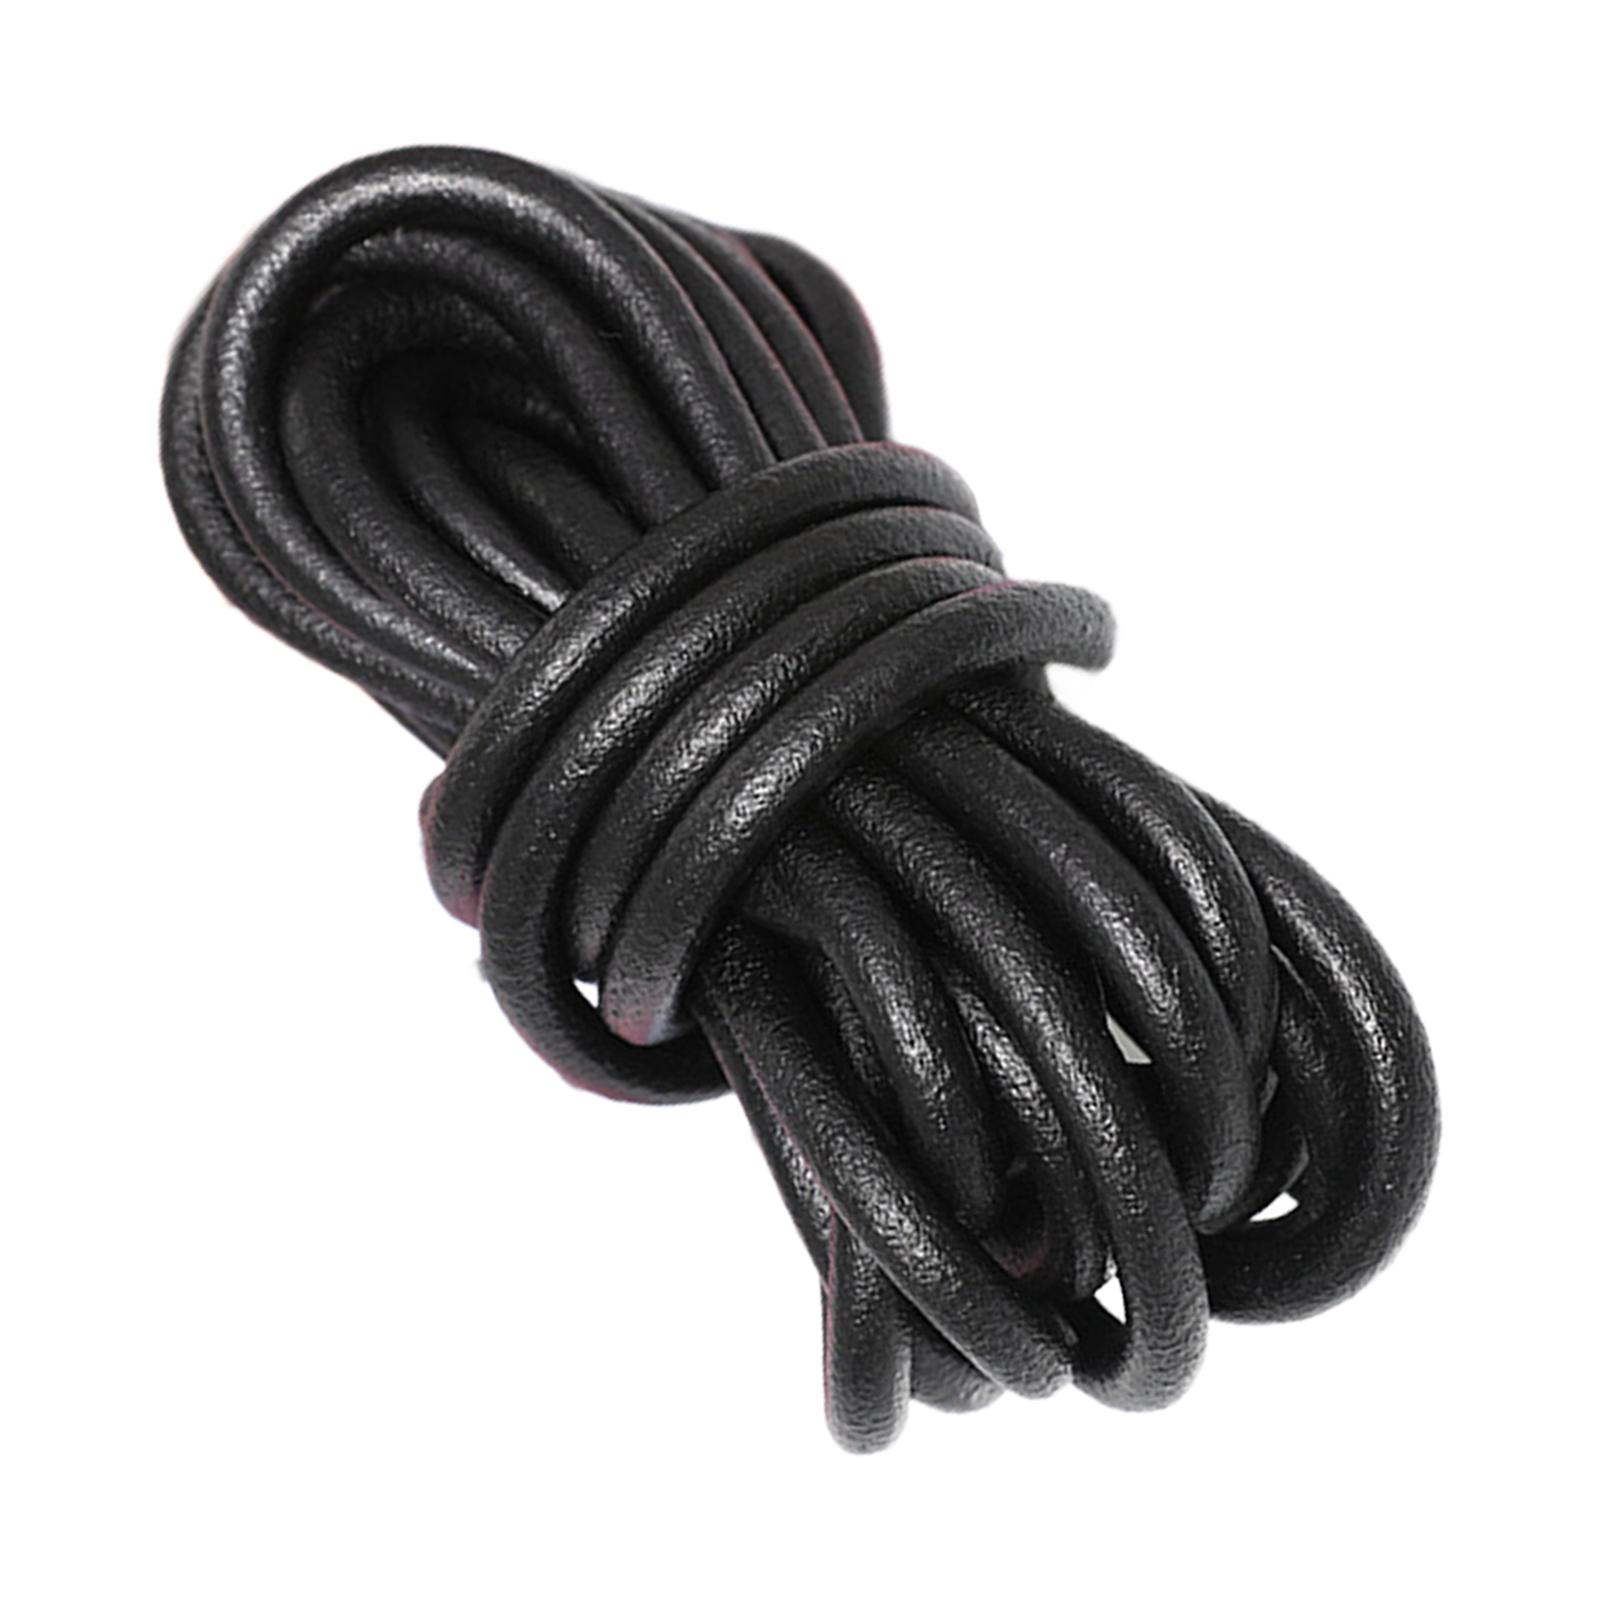 Tachiuwa 5 Yards 8mm Leather String Cord Rope Round Thread for DIY Jewelry Making Braiding Necklaces Crafting Beading, Women's, Size: 8mm 5M, Black